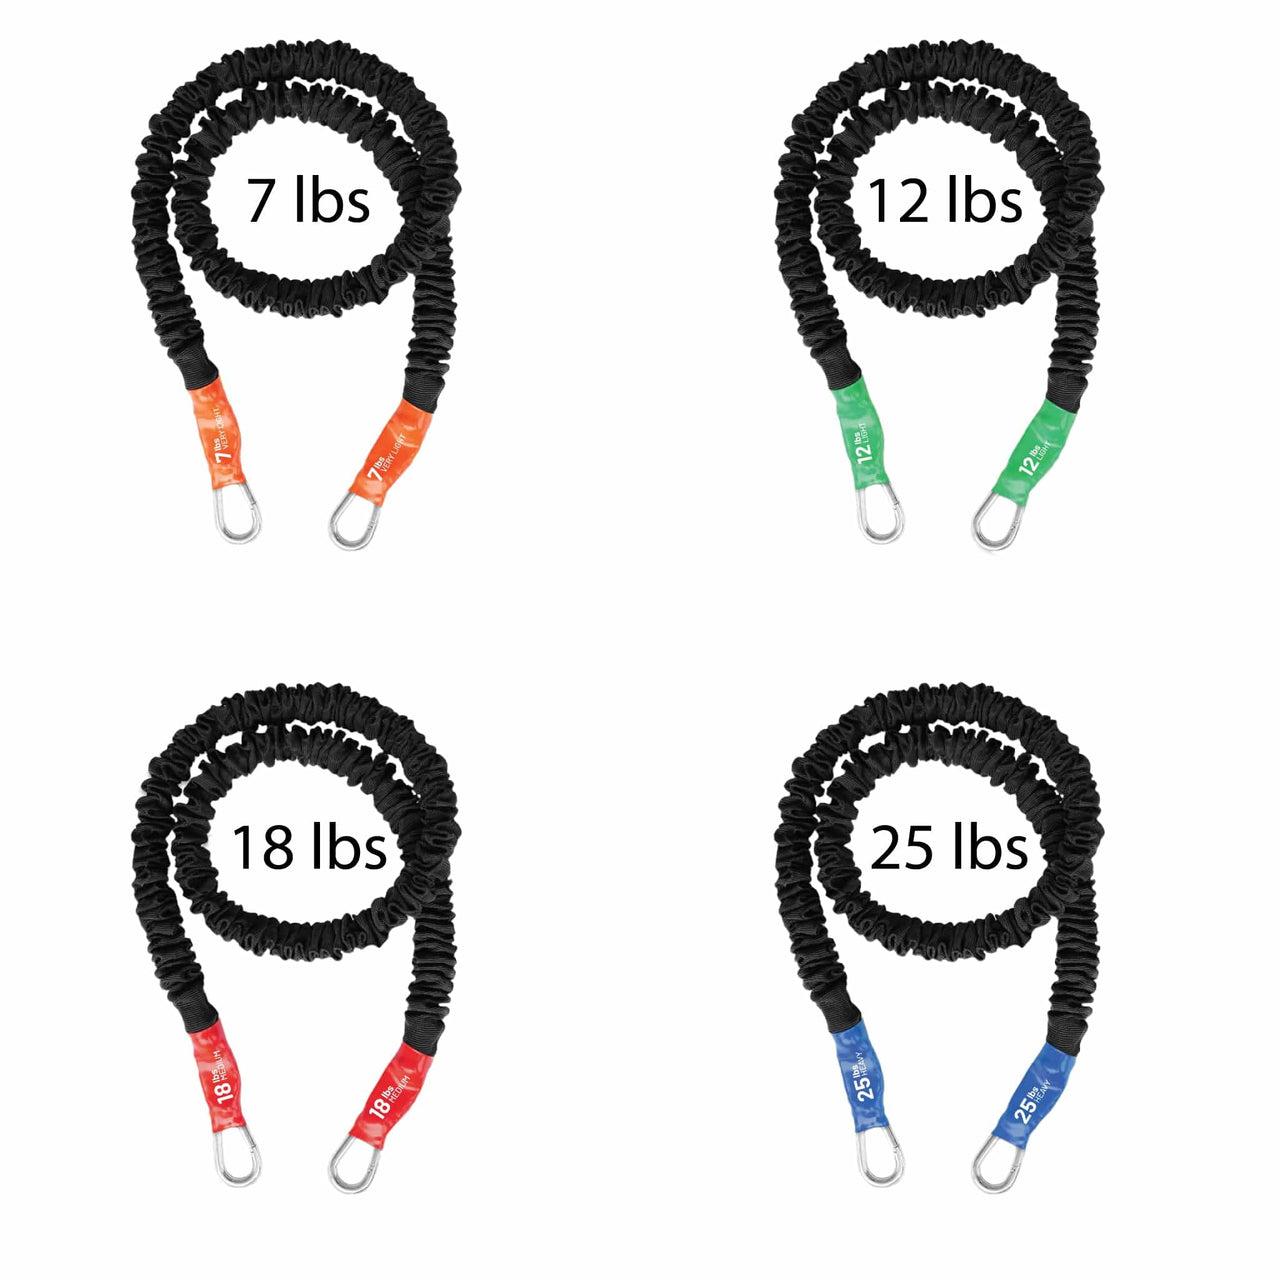 Body Sculpting Band 4 Packs- By FitCord